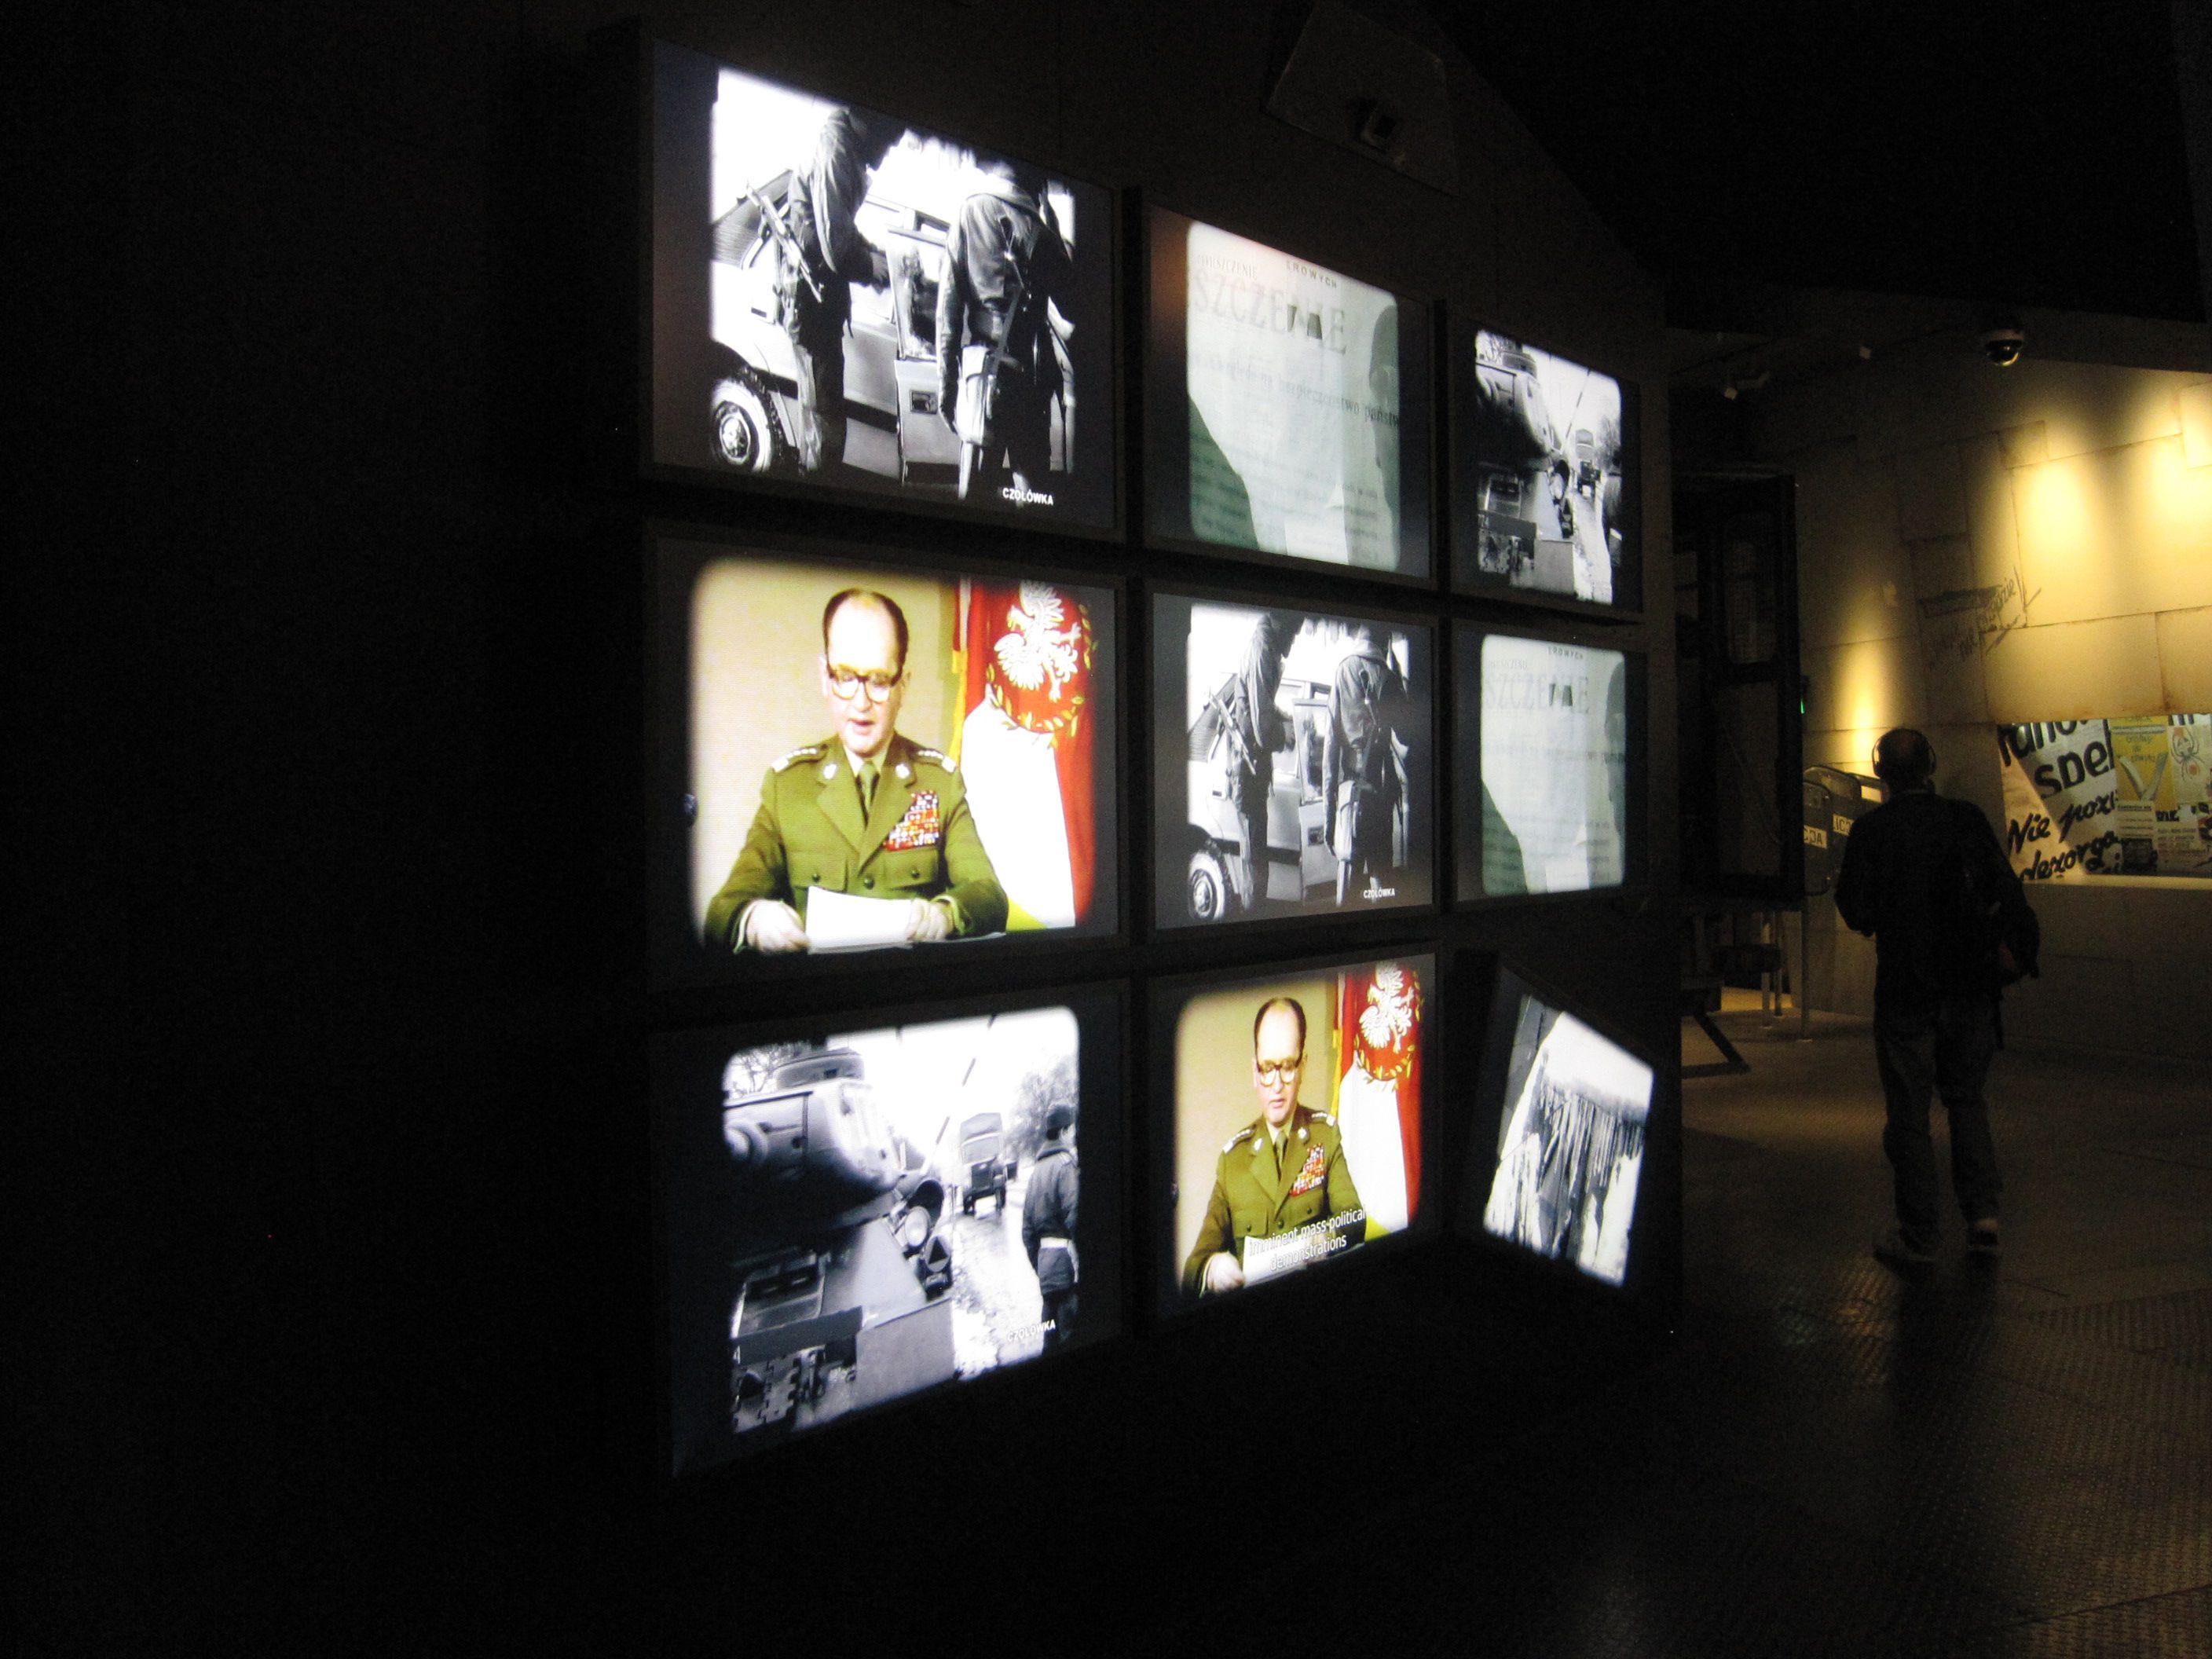 The use of multimedia tools in museums lends itself to exhibits with media content. In this case a variety of monitors show the December 13, 1981 television address of General Jaruzelski in which he declared martial law in Poland as well as showing the effects of martial law.
Photo: Irmgard Zündorf, European Solidarity Center (Polish: Europejskie Centrum Solidarności), Gdańsk 2015, License: [https://creativecommons.org/licenses/by-nc/3.0/de/ CC BY-NC 3.0 DE]